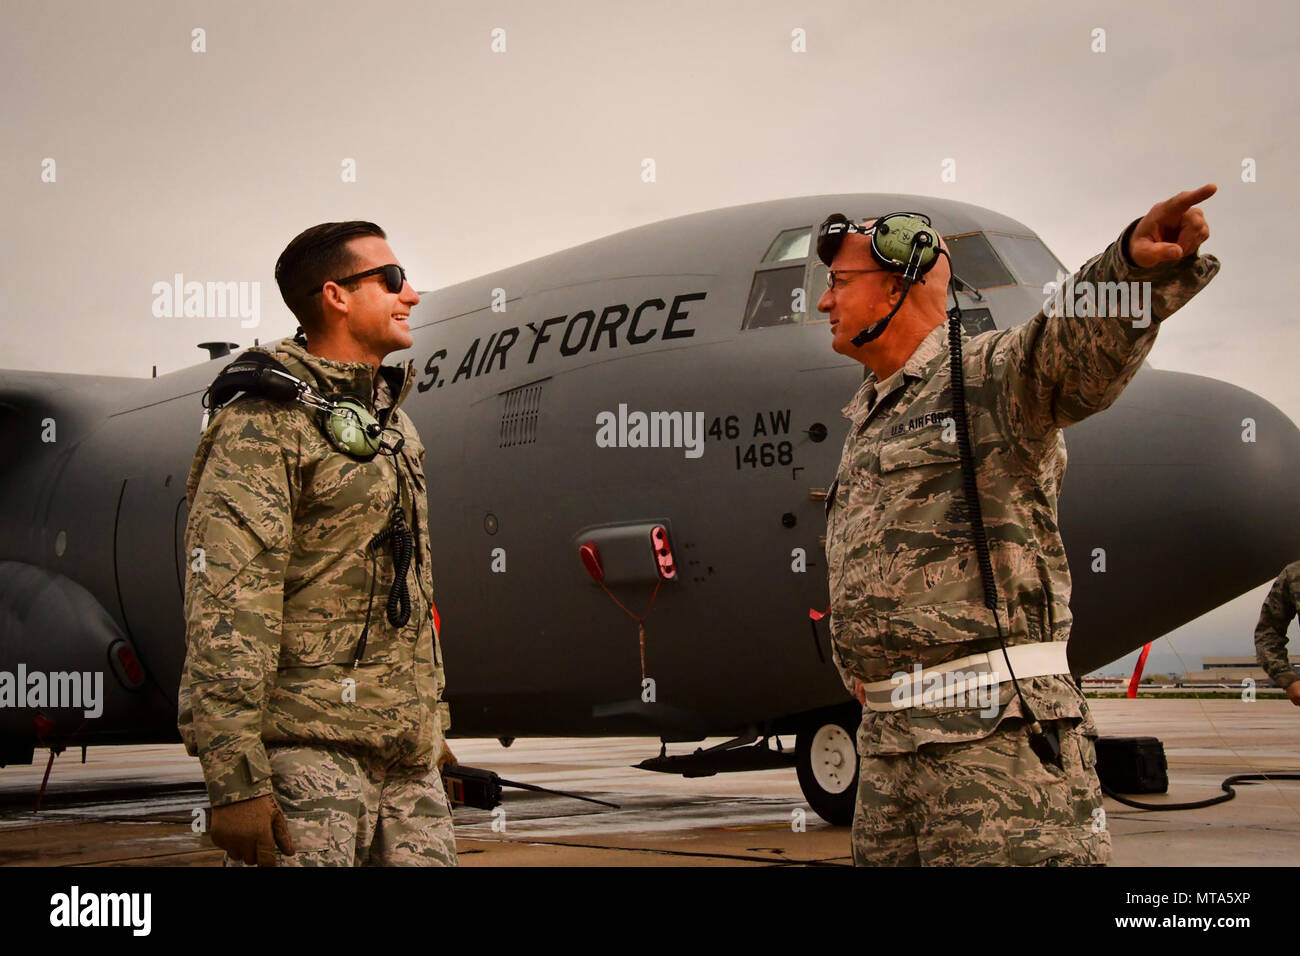 U.S. Air National Guard members Tech. Sgt. Nathan Moon and Tech. Sgt. Joseph Henry Harris  from the 146th Maintenance Squadron inspect a C-130J aircraft at Gowen Field, Idaho, April 20, 2017. Moon and Harris along with a maintenance crew from the 146th Airlift Wing will be providing maintenance service on two C-130J aircraft equipped with the Modular Airborne Fire Fighting System (MAFFS) from the Channel Islands Air National Guard Station during the week-long multi-agency wildfire training with the U.S. Forest Service, CAL FIRE, and multiple Air National Guard and U.S. Air Force Reserve wings. Stock Photo